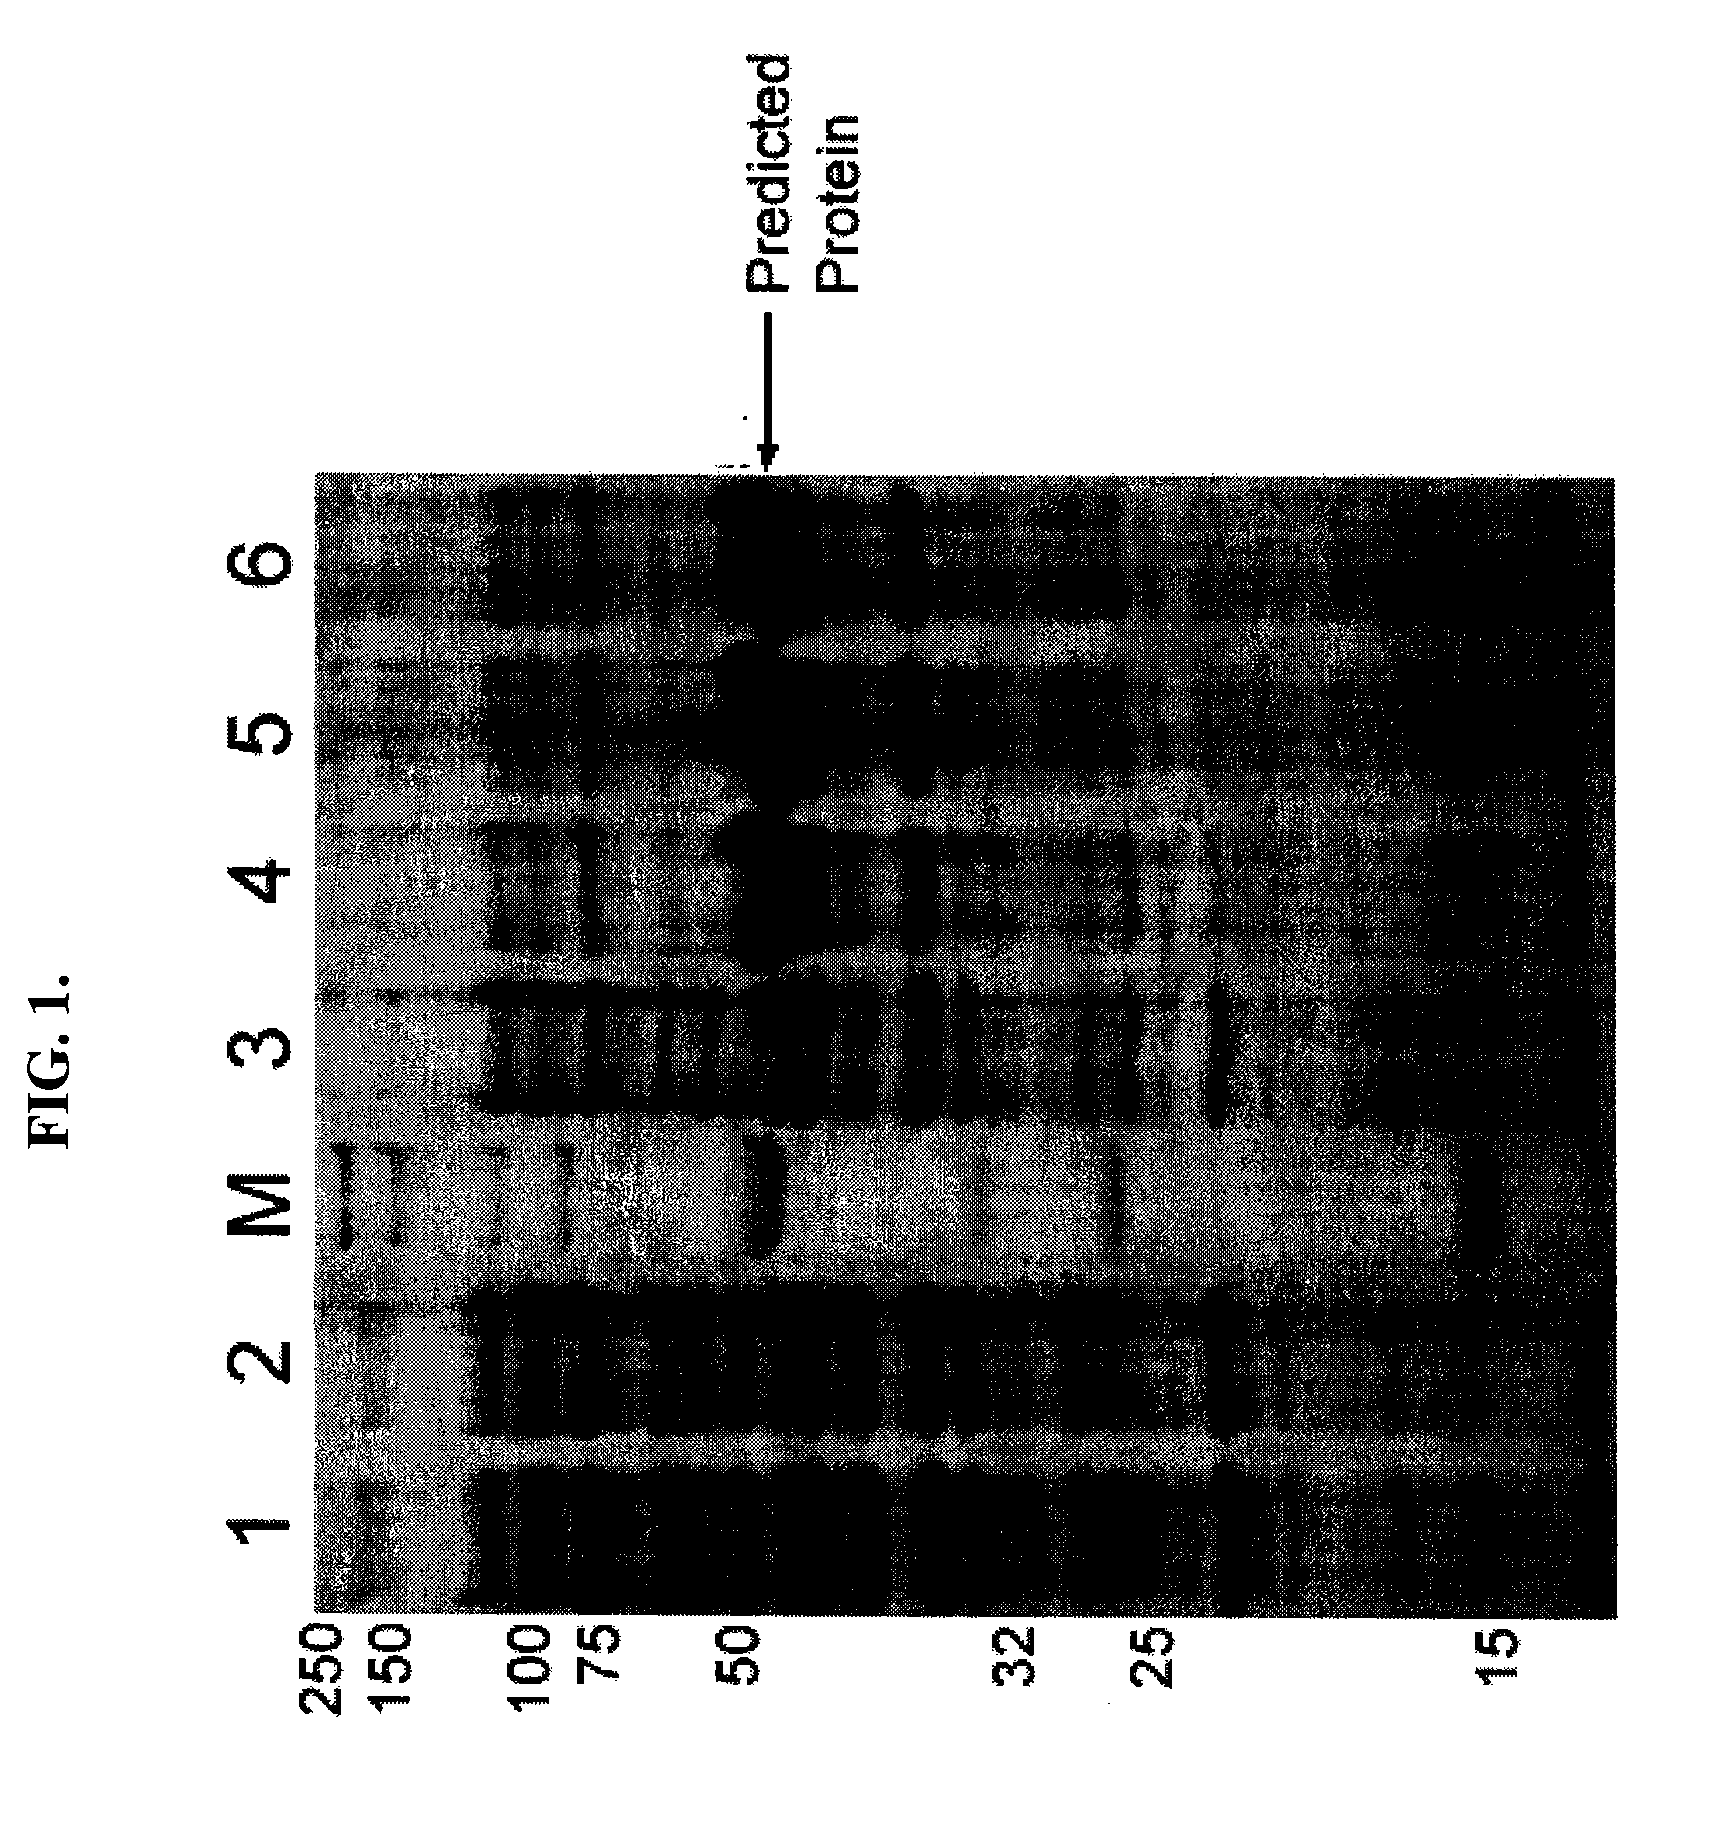 Method of Sequence Optimization for Improved Recombinant Protein Expression using a Particle Swarm Optimization Algorithm